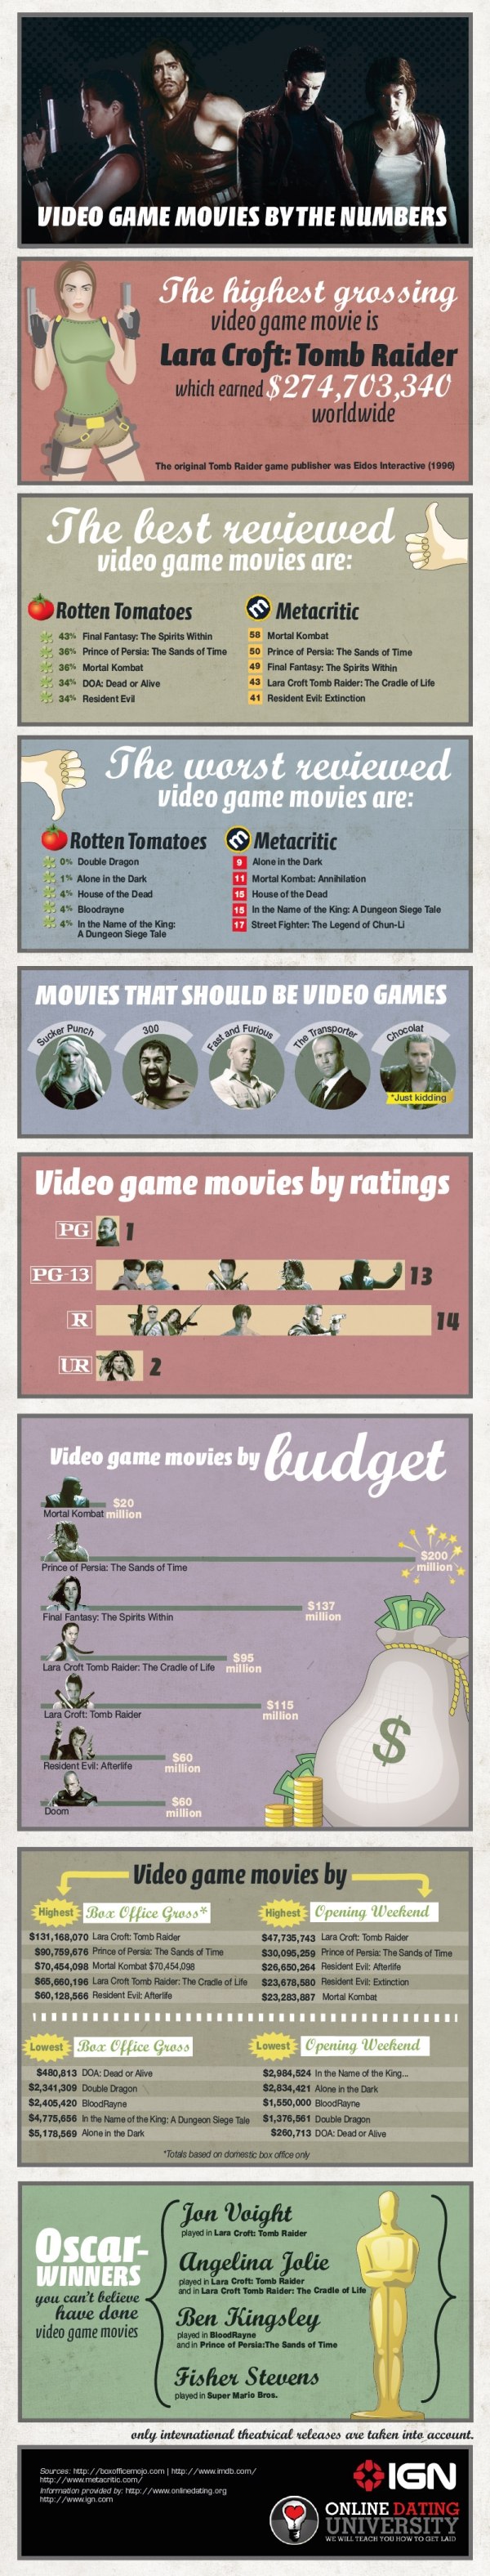 Video Game Movies: By The Numbers [Infographic]